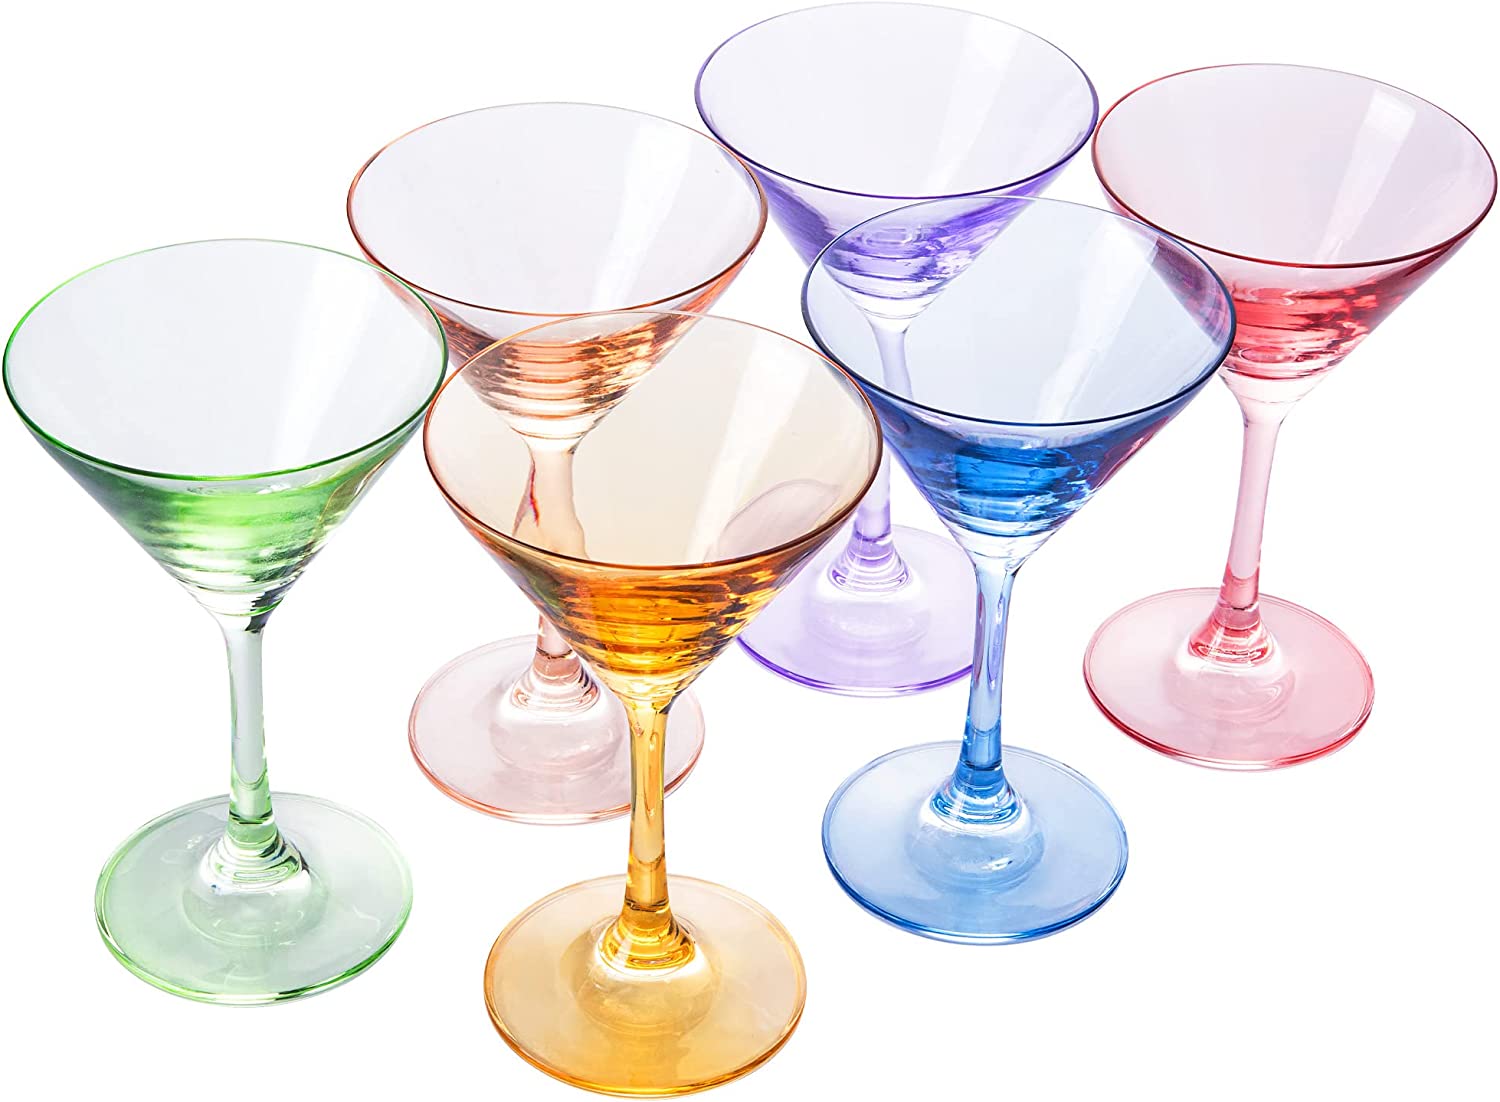 Unique Cocktail Glasses Set of 2 8-Ounce Double Sided Colorful Glass, Cute  Cocktail Glassware Vintag…See more Unique Cocktail Glasses Set of 2 8-Ounce